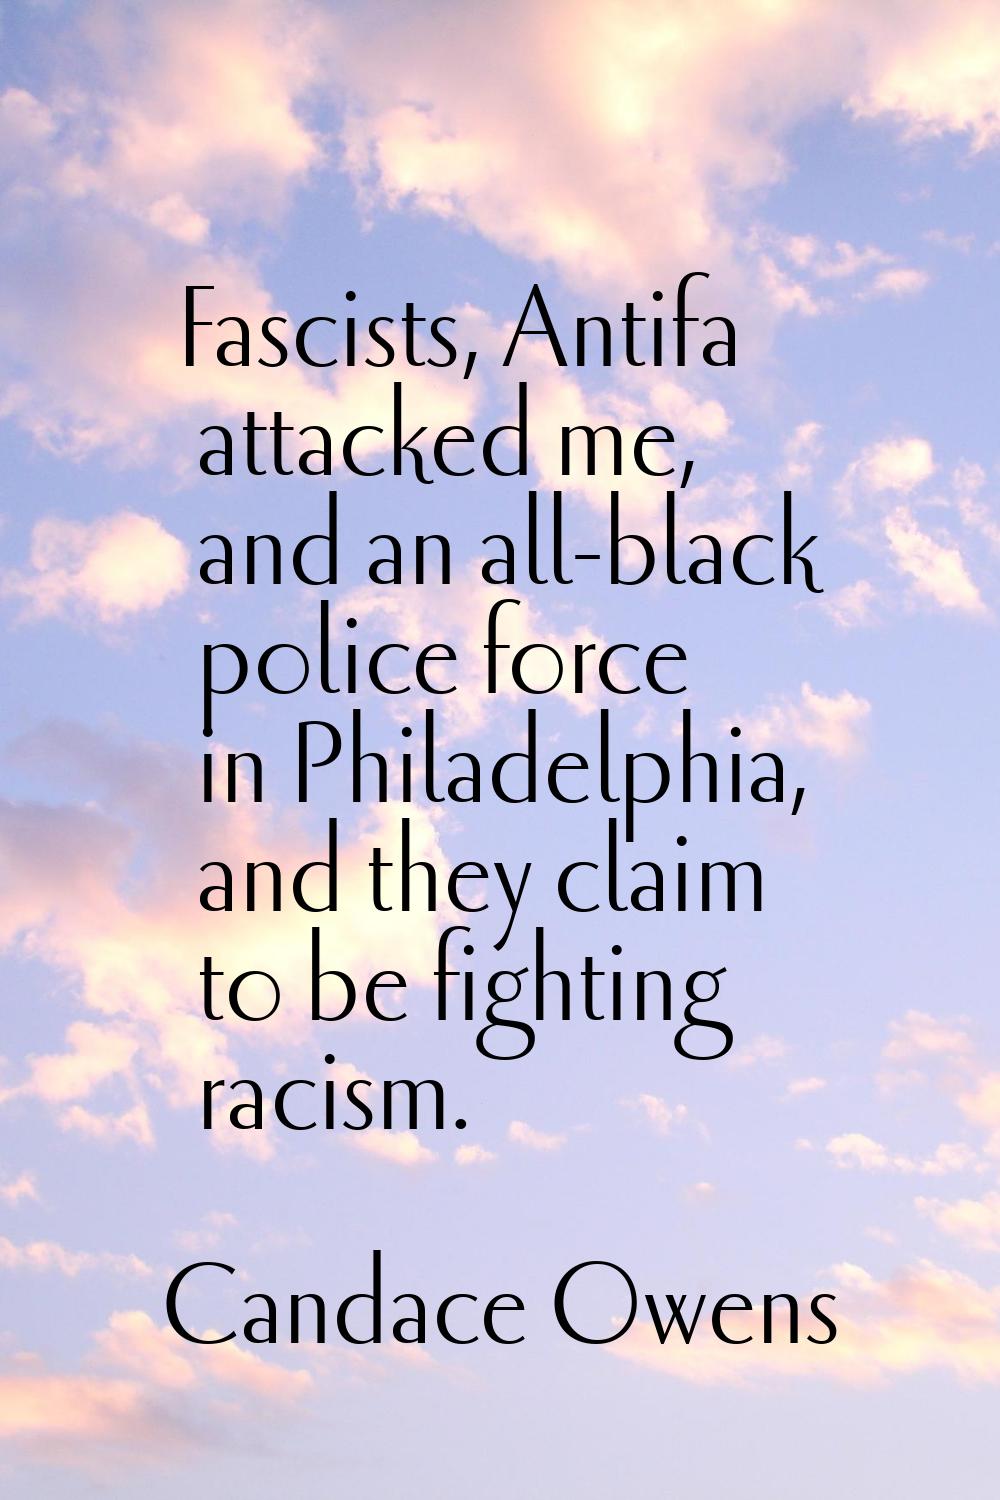 Fascists, Antifa attacked me, and an all-black police force in Philadelphia, and they claim to be f